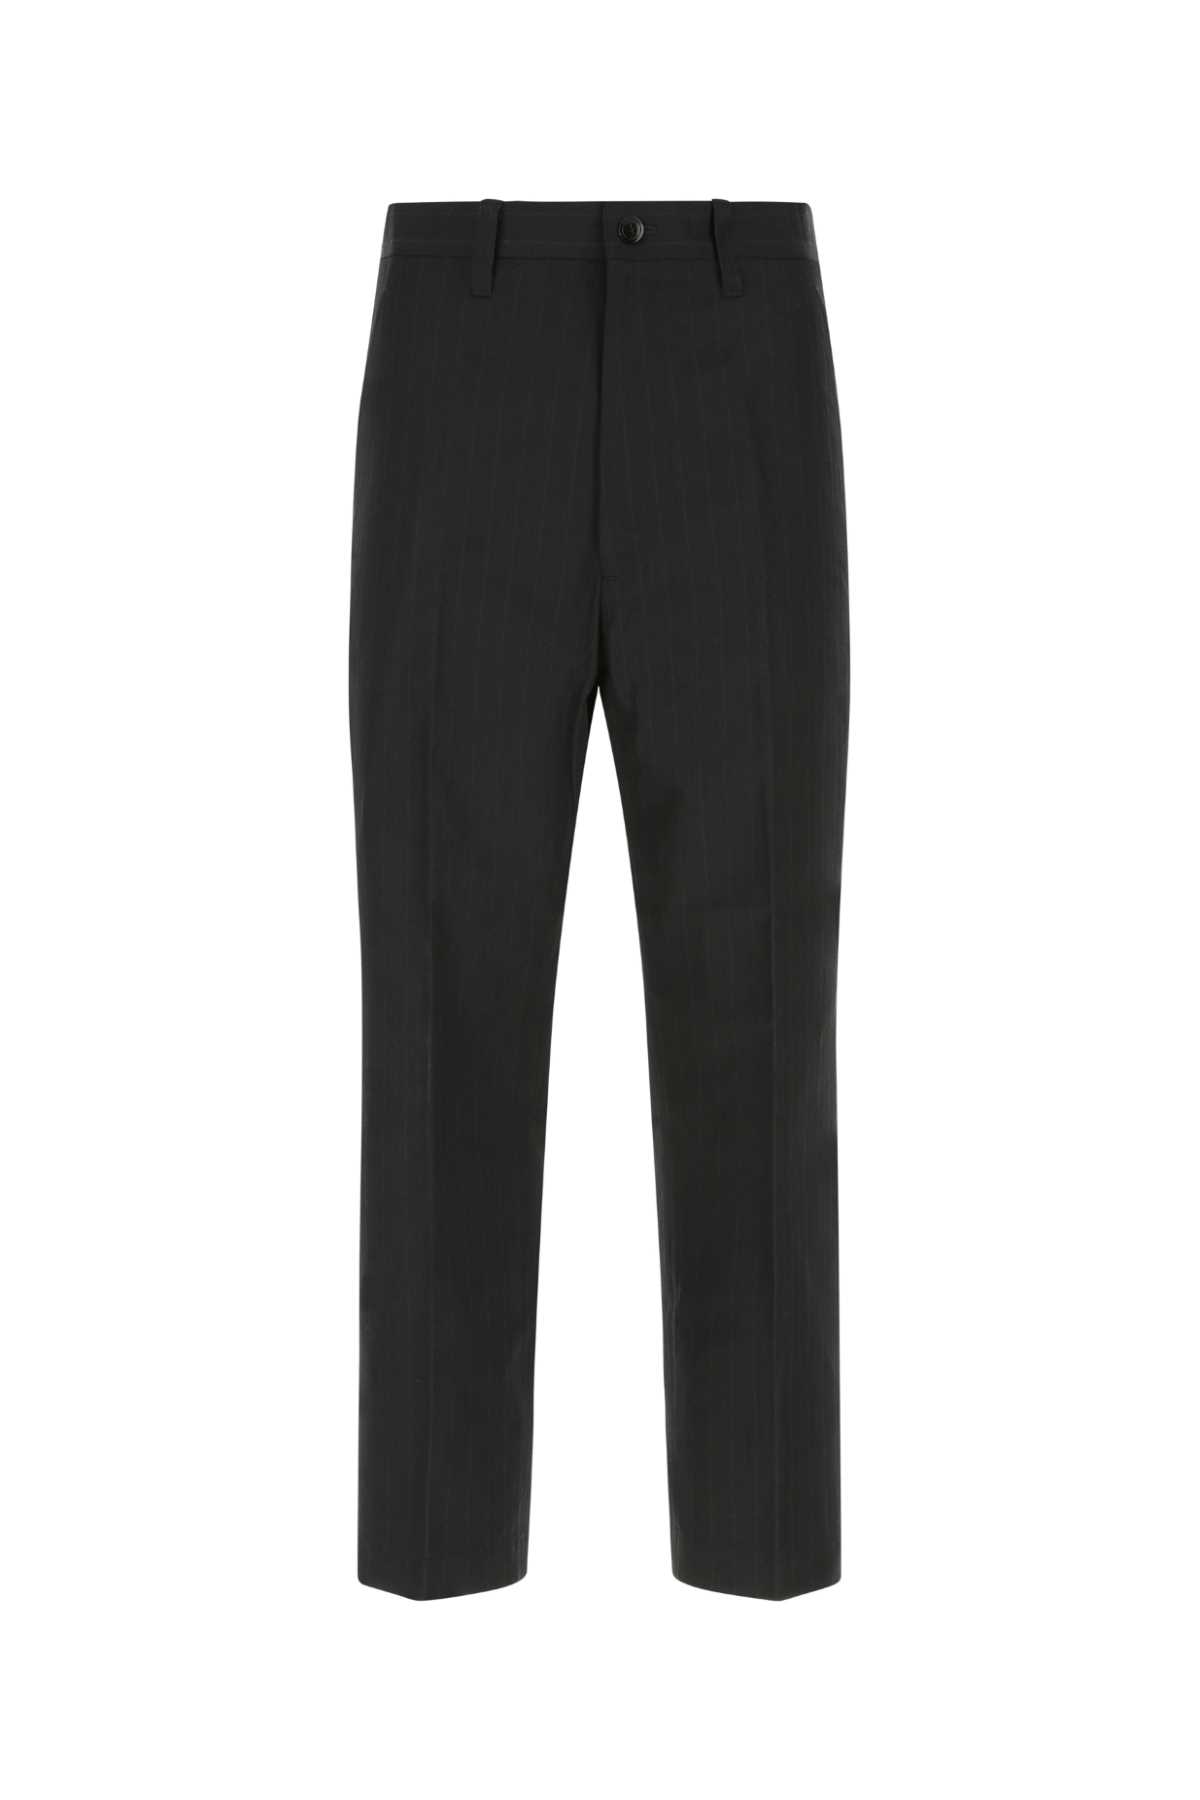 Embroidered Polyester Blend Pant